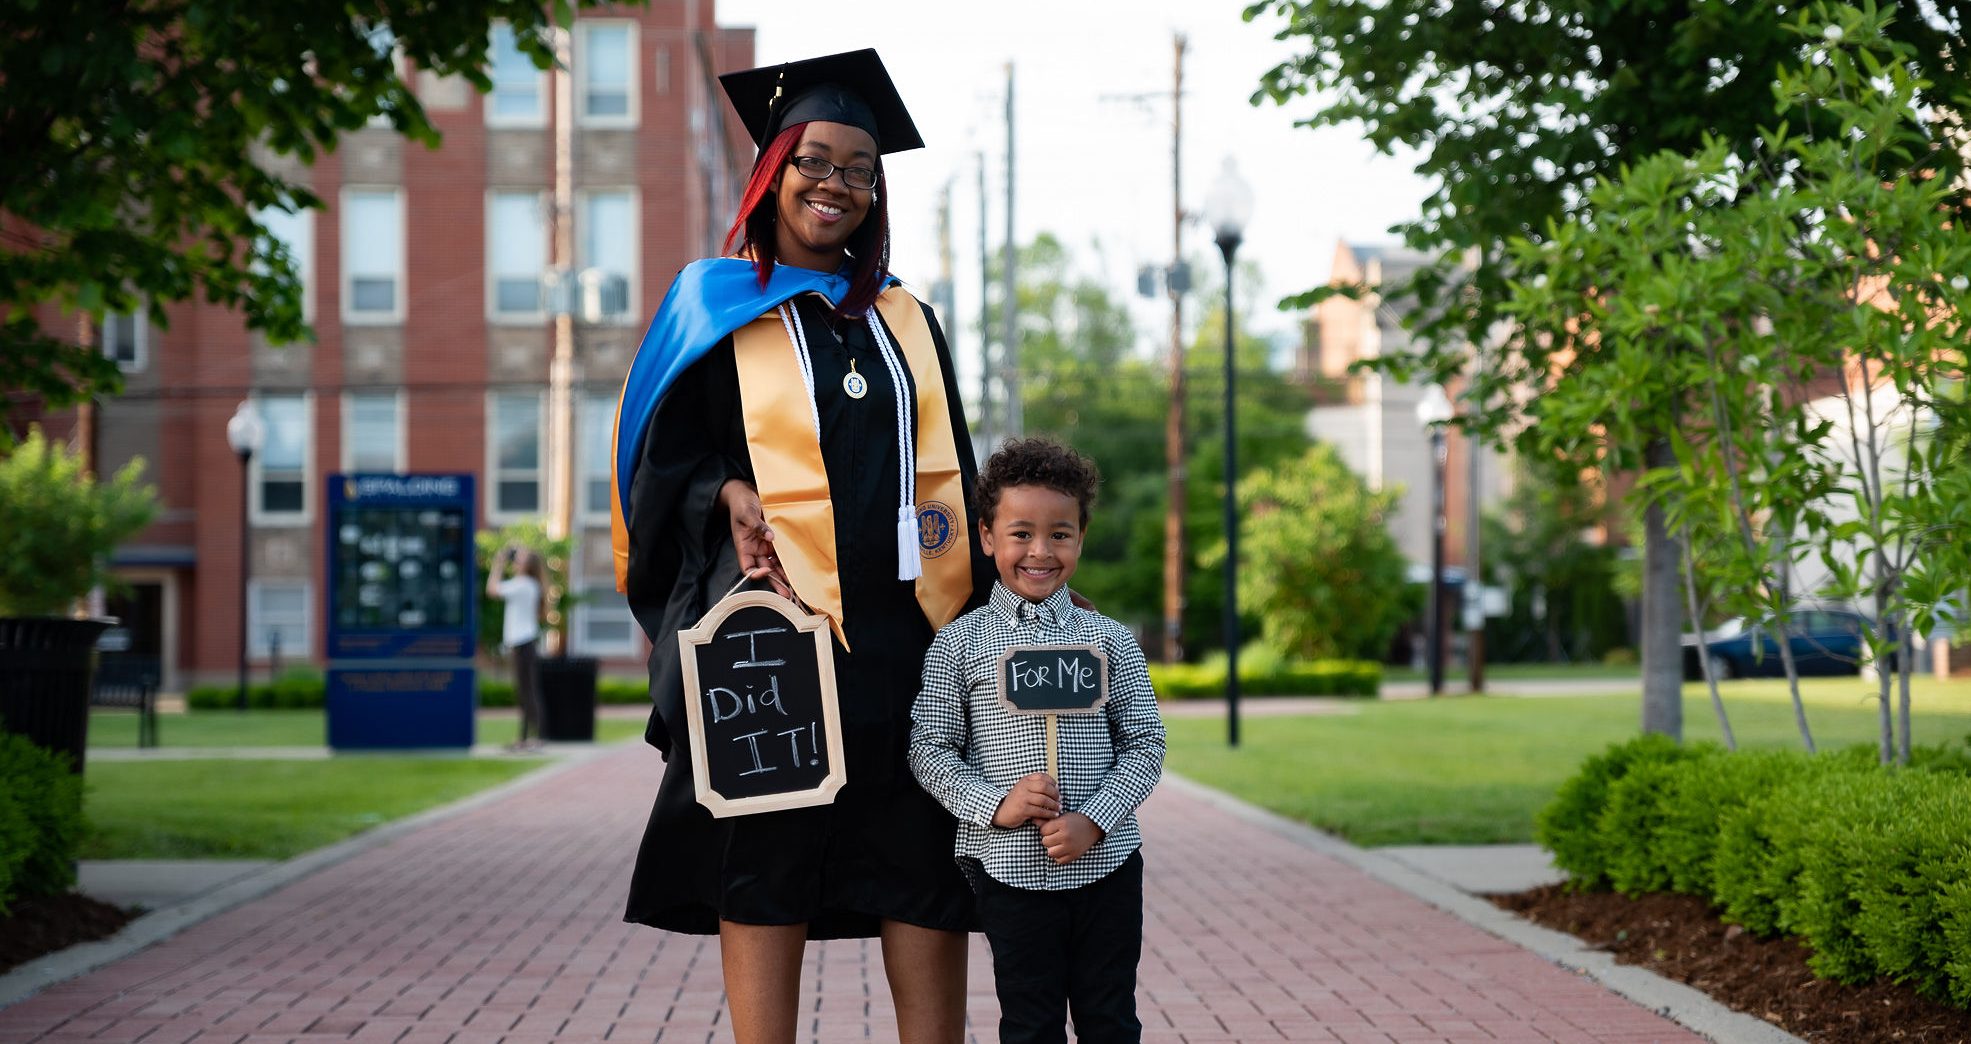 Spalding MSBC graduating student Kristin Spencer, wearing cap and gown, and her young son outside at Mother Catherine Square. Shes holding a sign, "I Did It!," and he has one that says, "For Me"